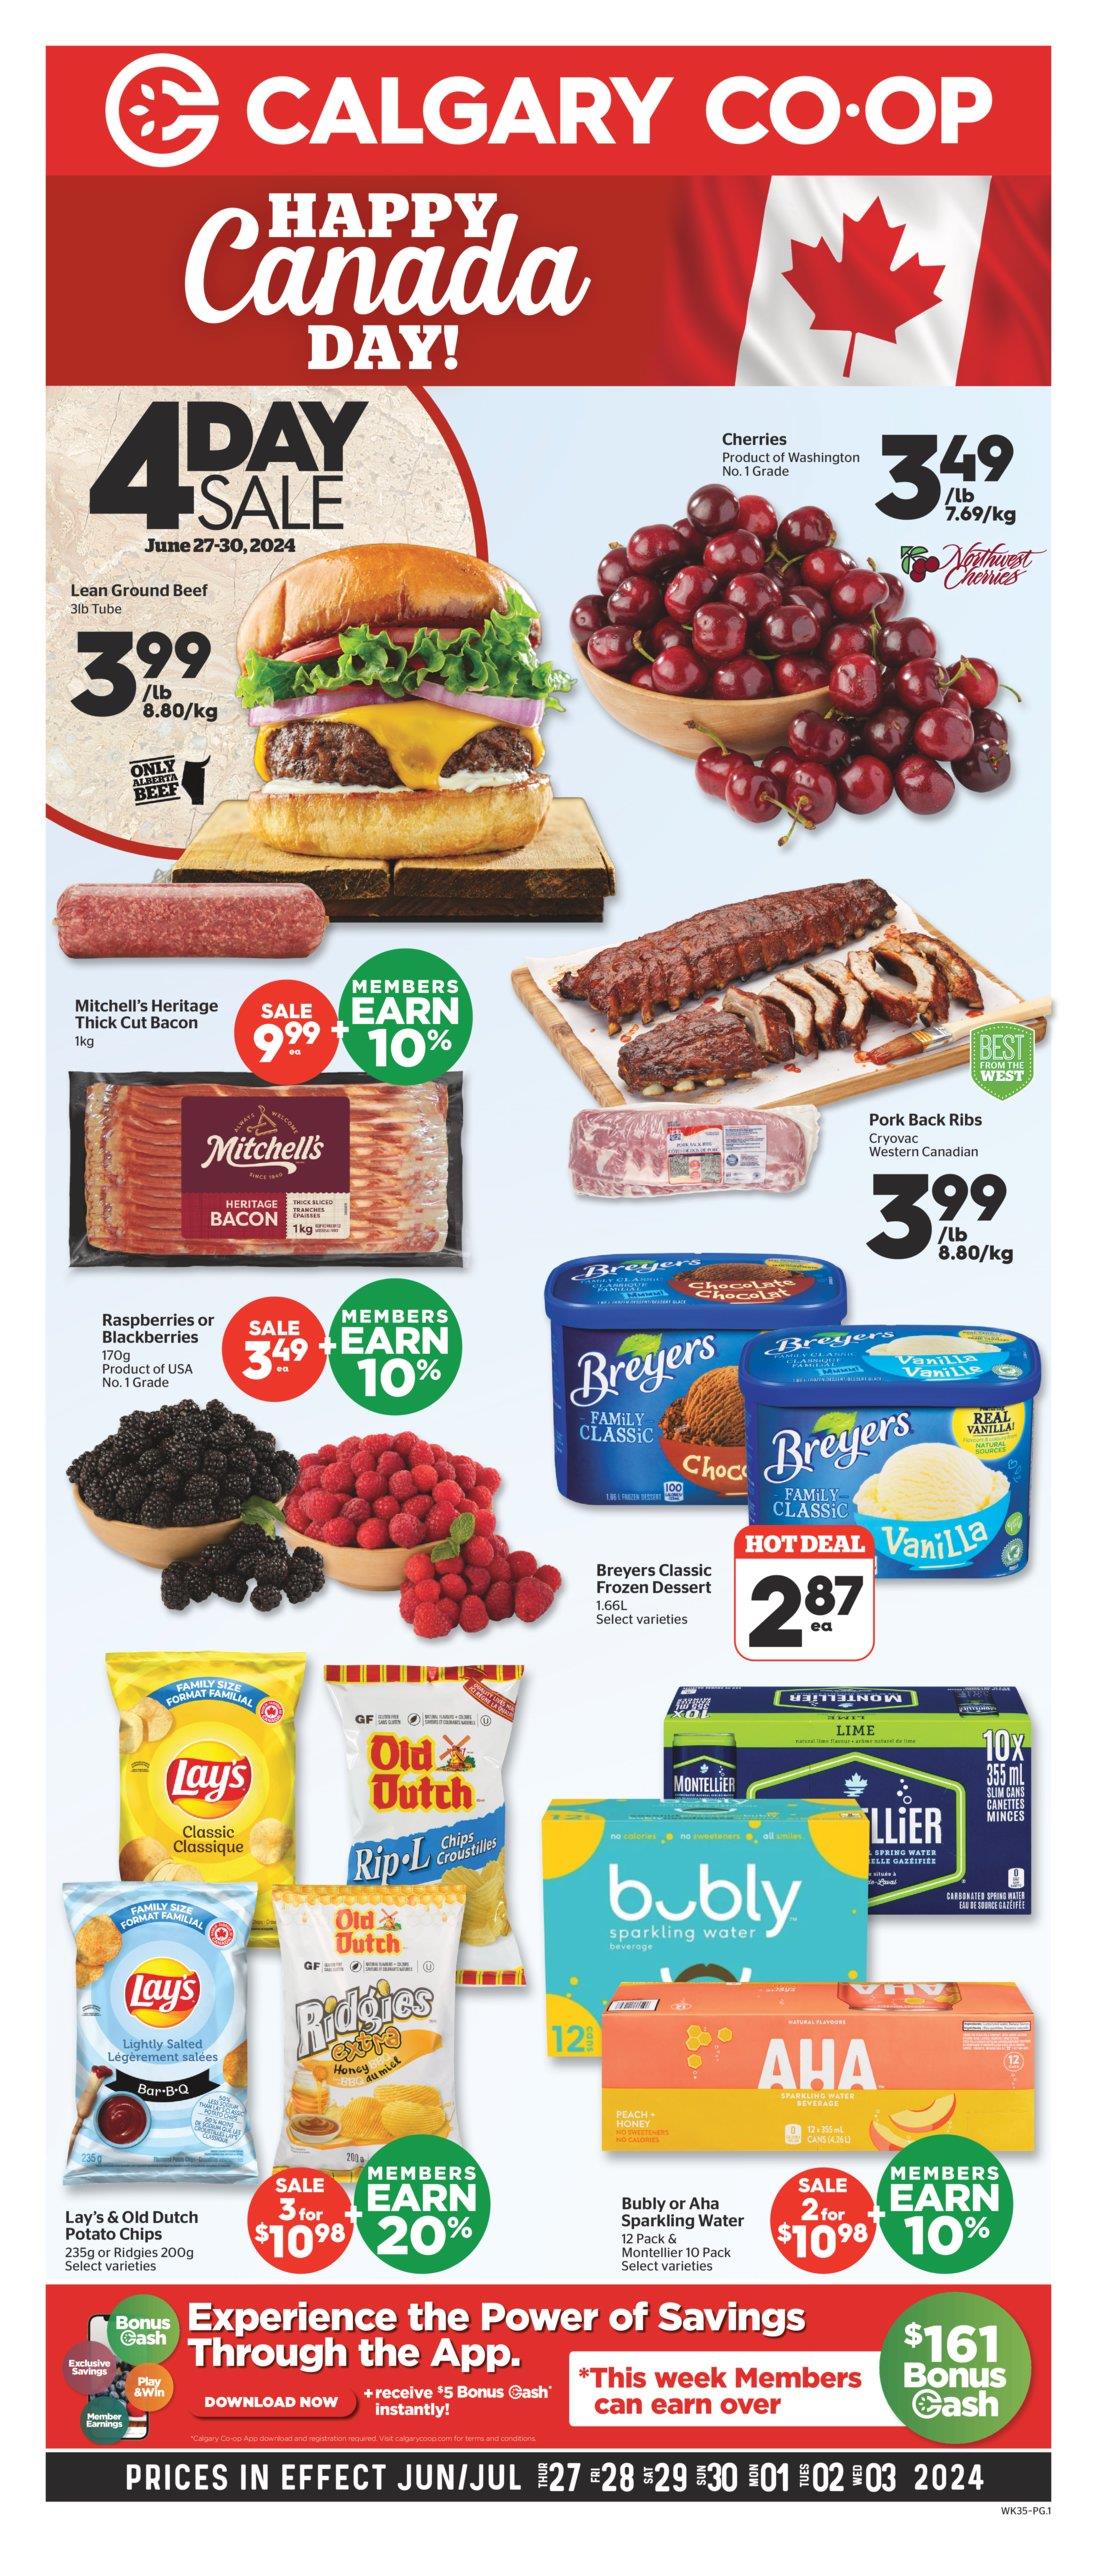 Calgary Co-op - Weekly Flyer Specials - Page 1